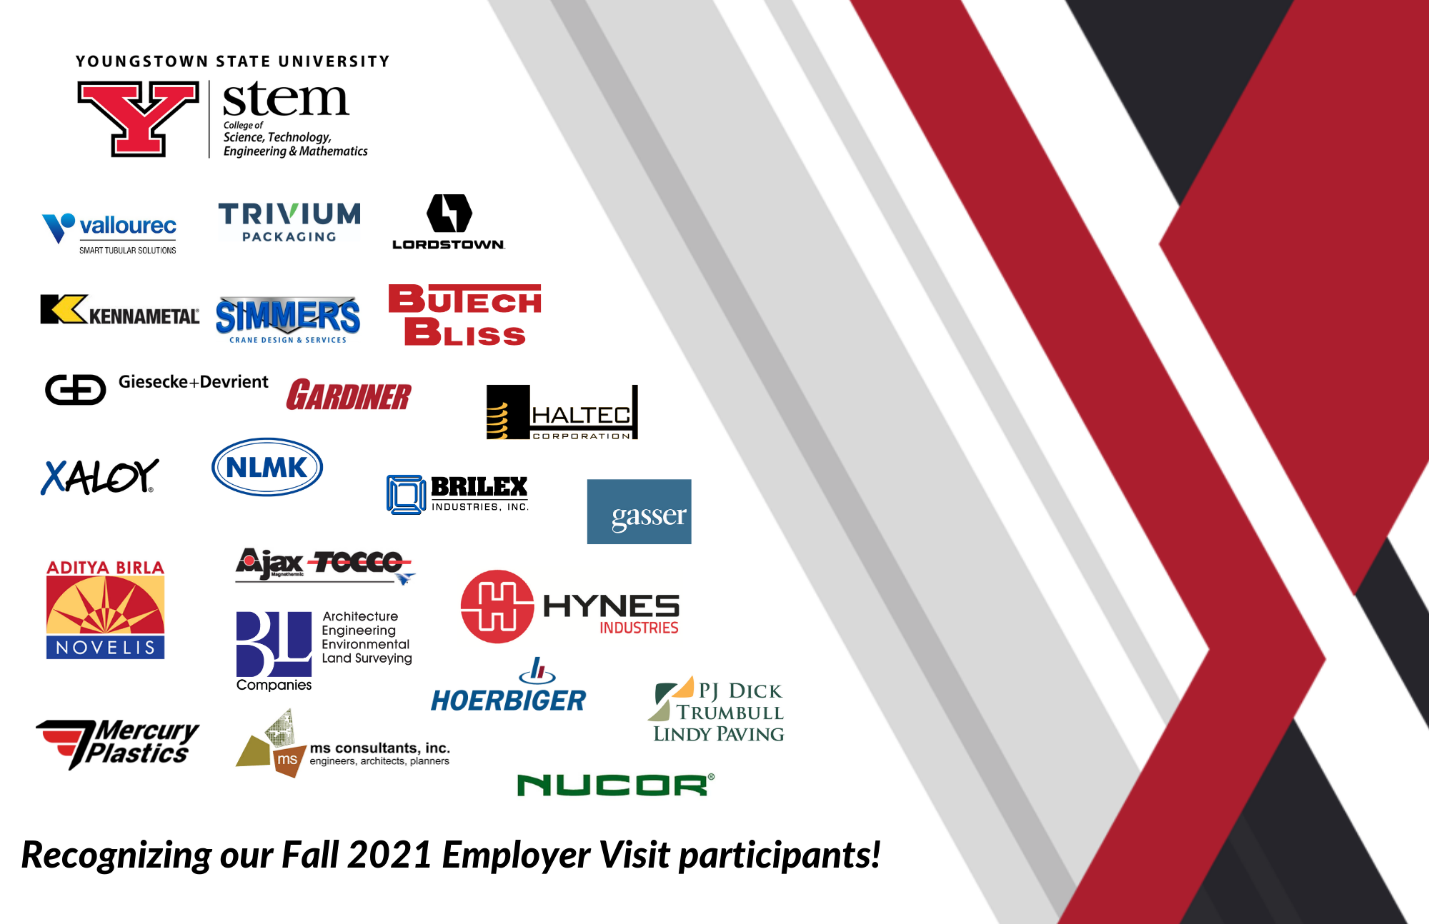 Listing of employers who visited campus in Fall 2021